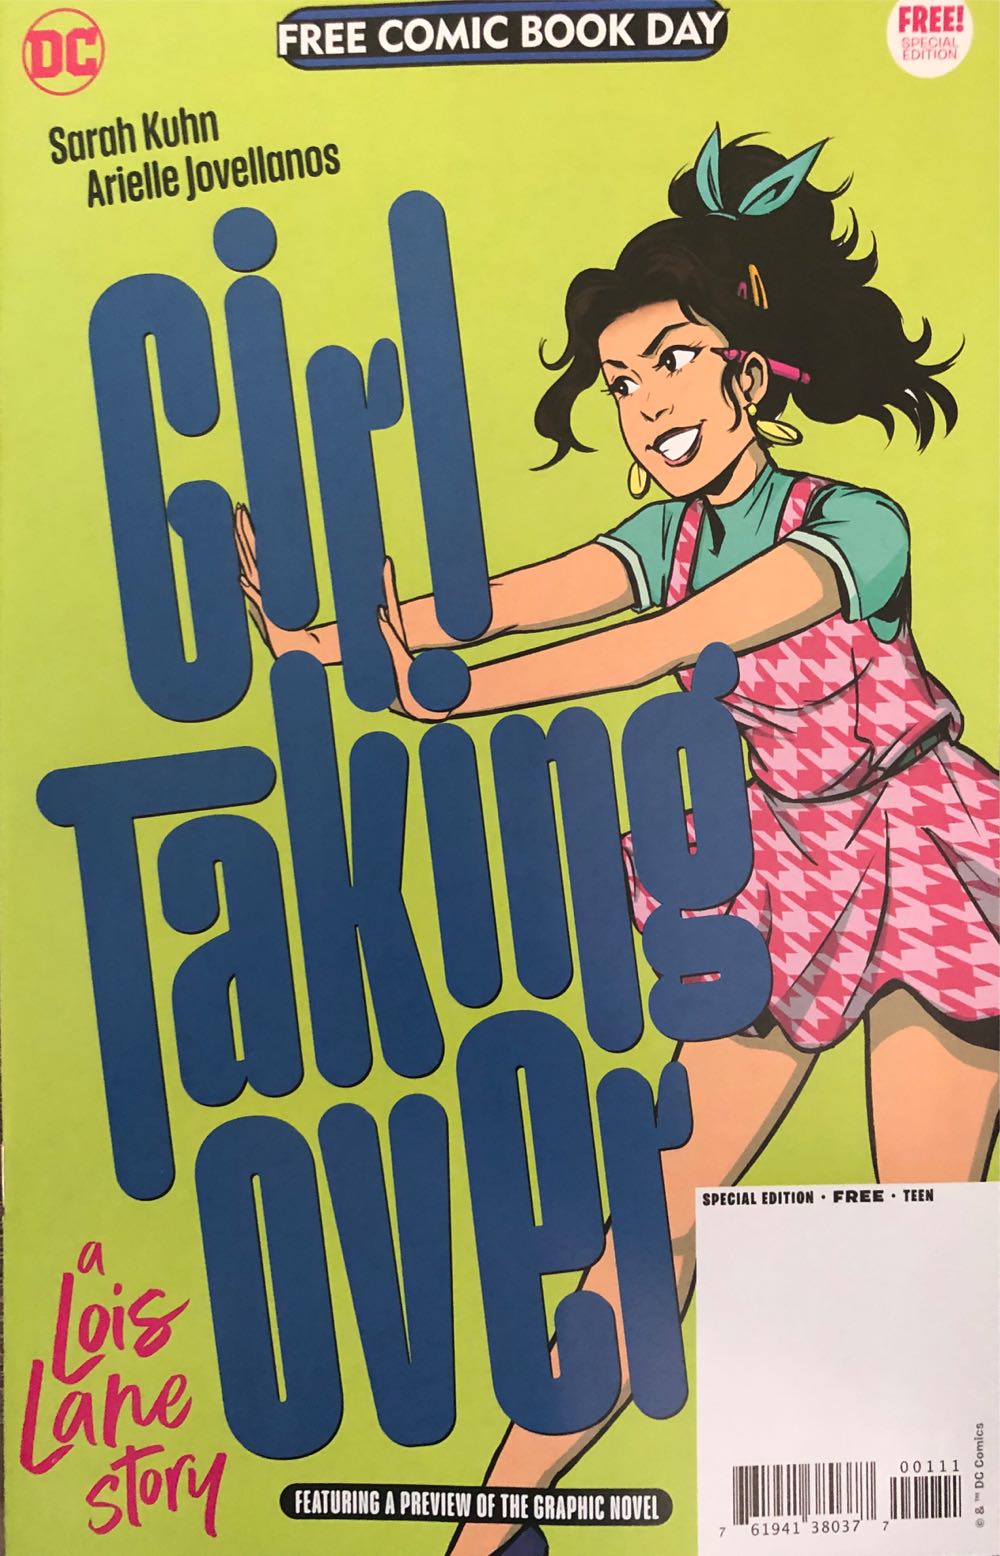 Girl Taking Over: A Lois Lane Story - DC Comics (1 - May 2023) comic book collectible [Barcode 76194138037700111] - Main Image 1